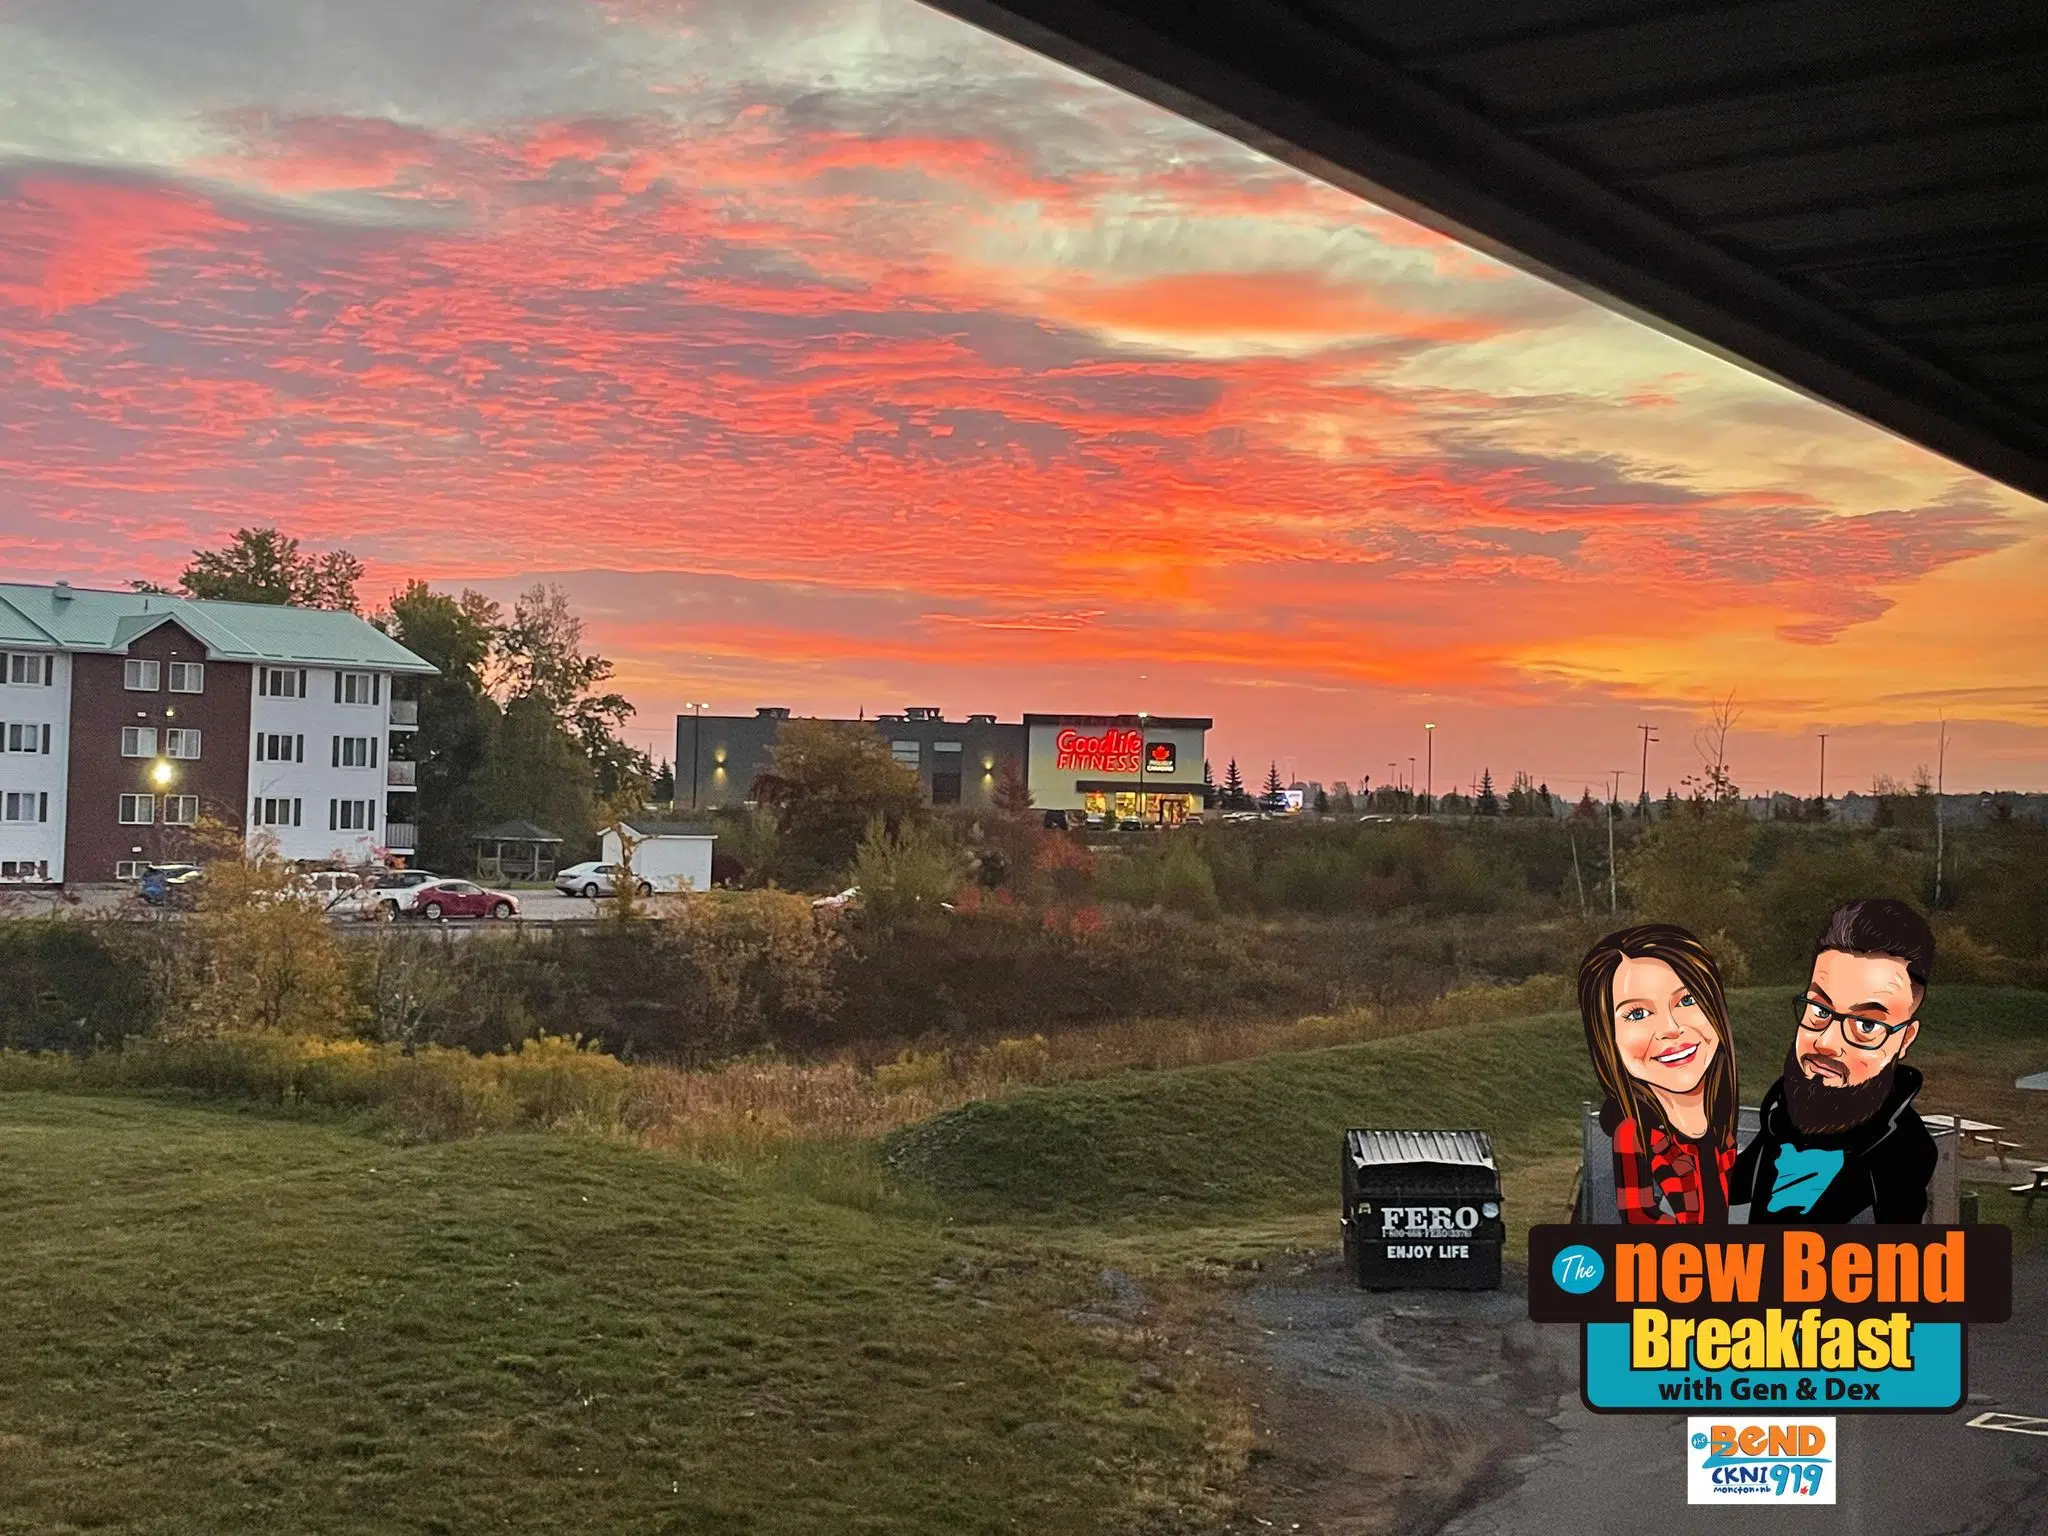 The sunrise on October 13th!  Did you see it?